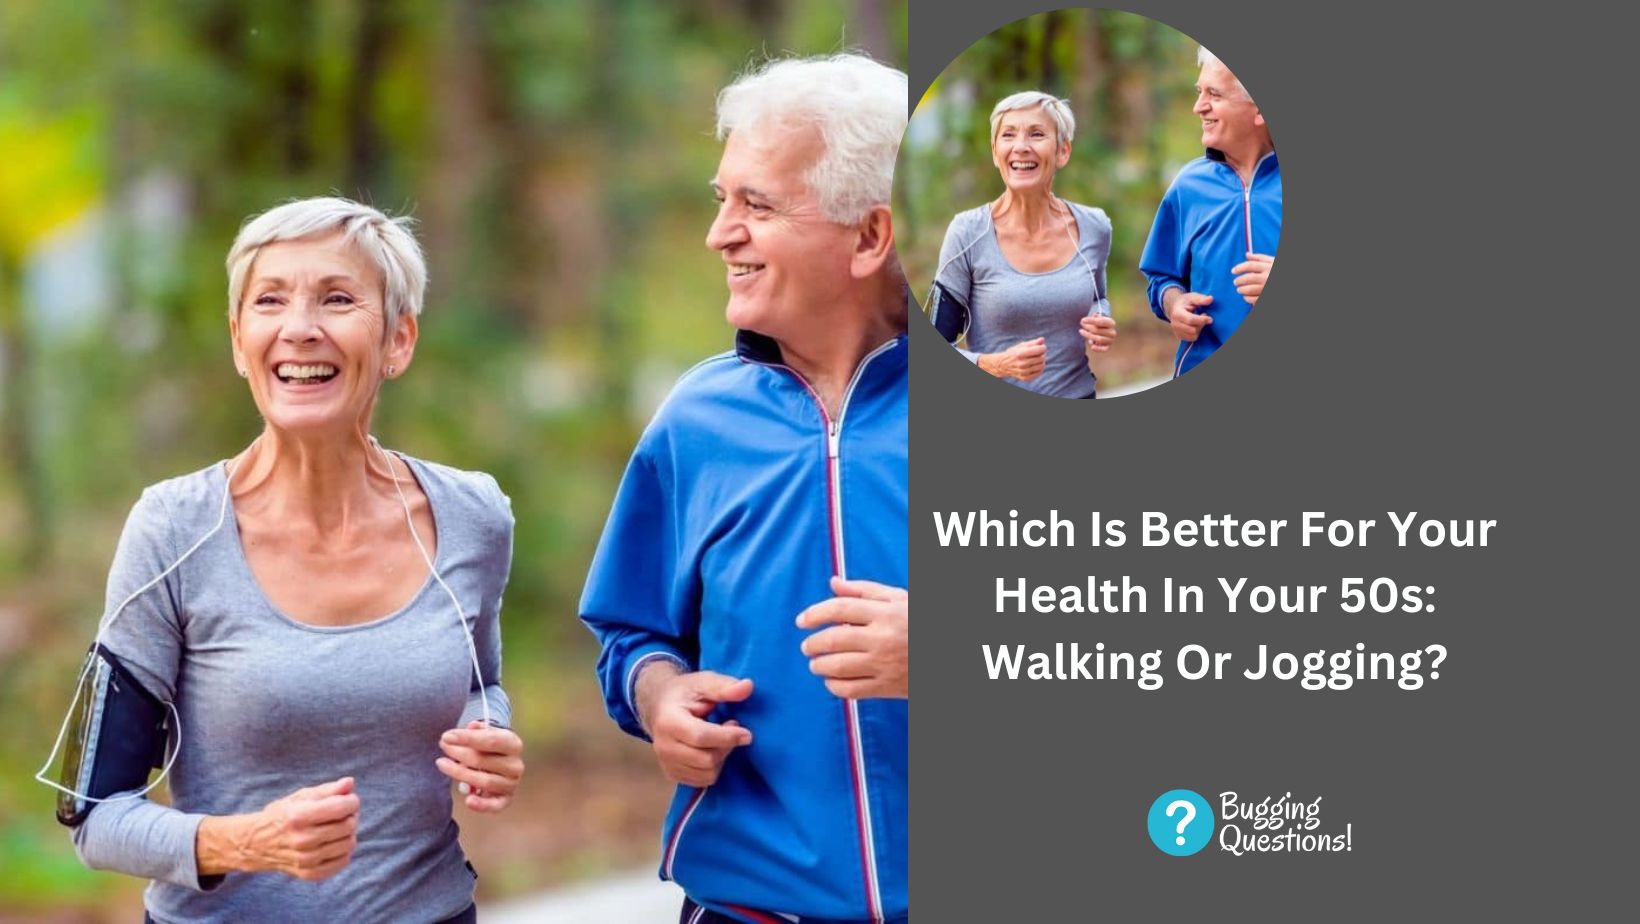 Which Is Better For Your Health In Your 50s: Walking Or Jogging?